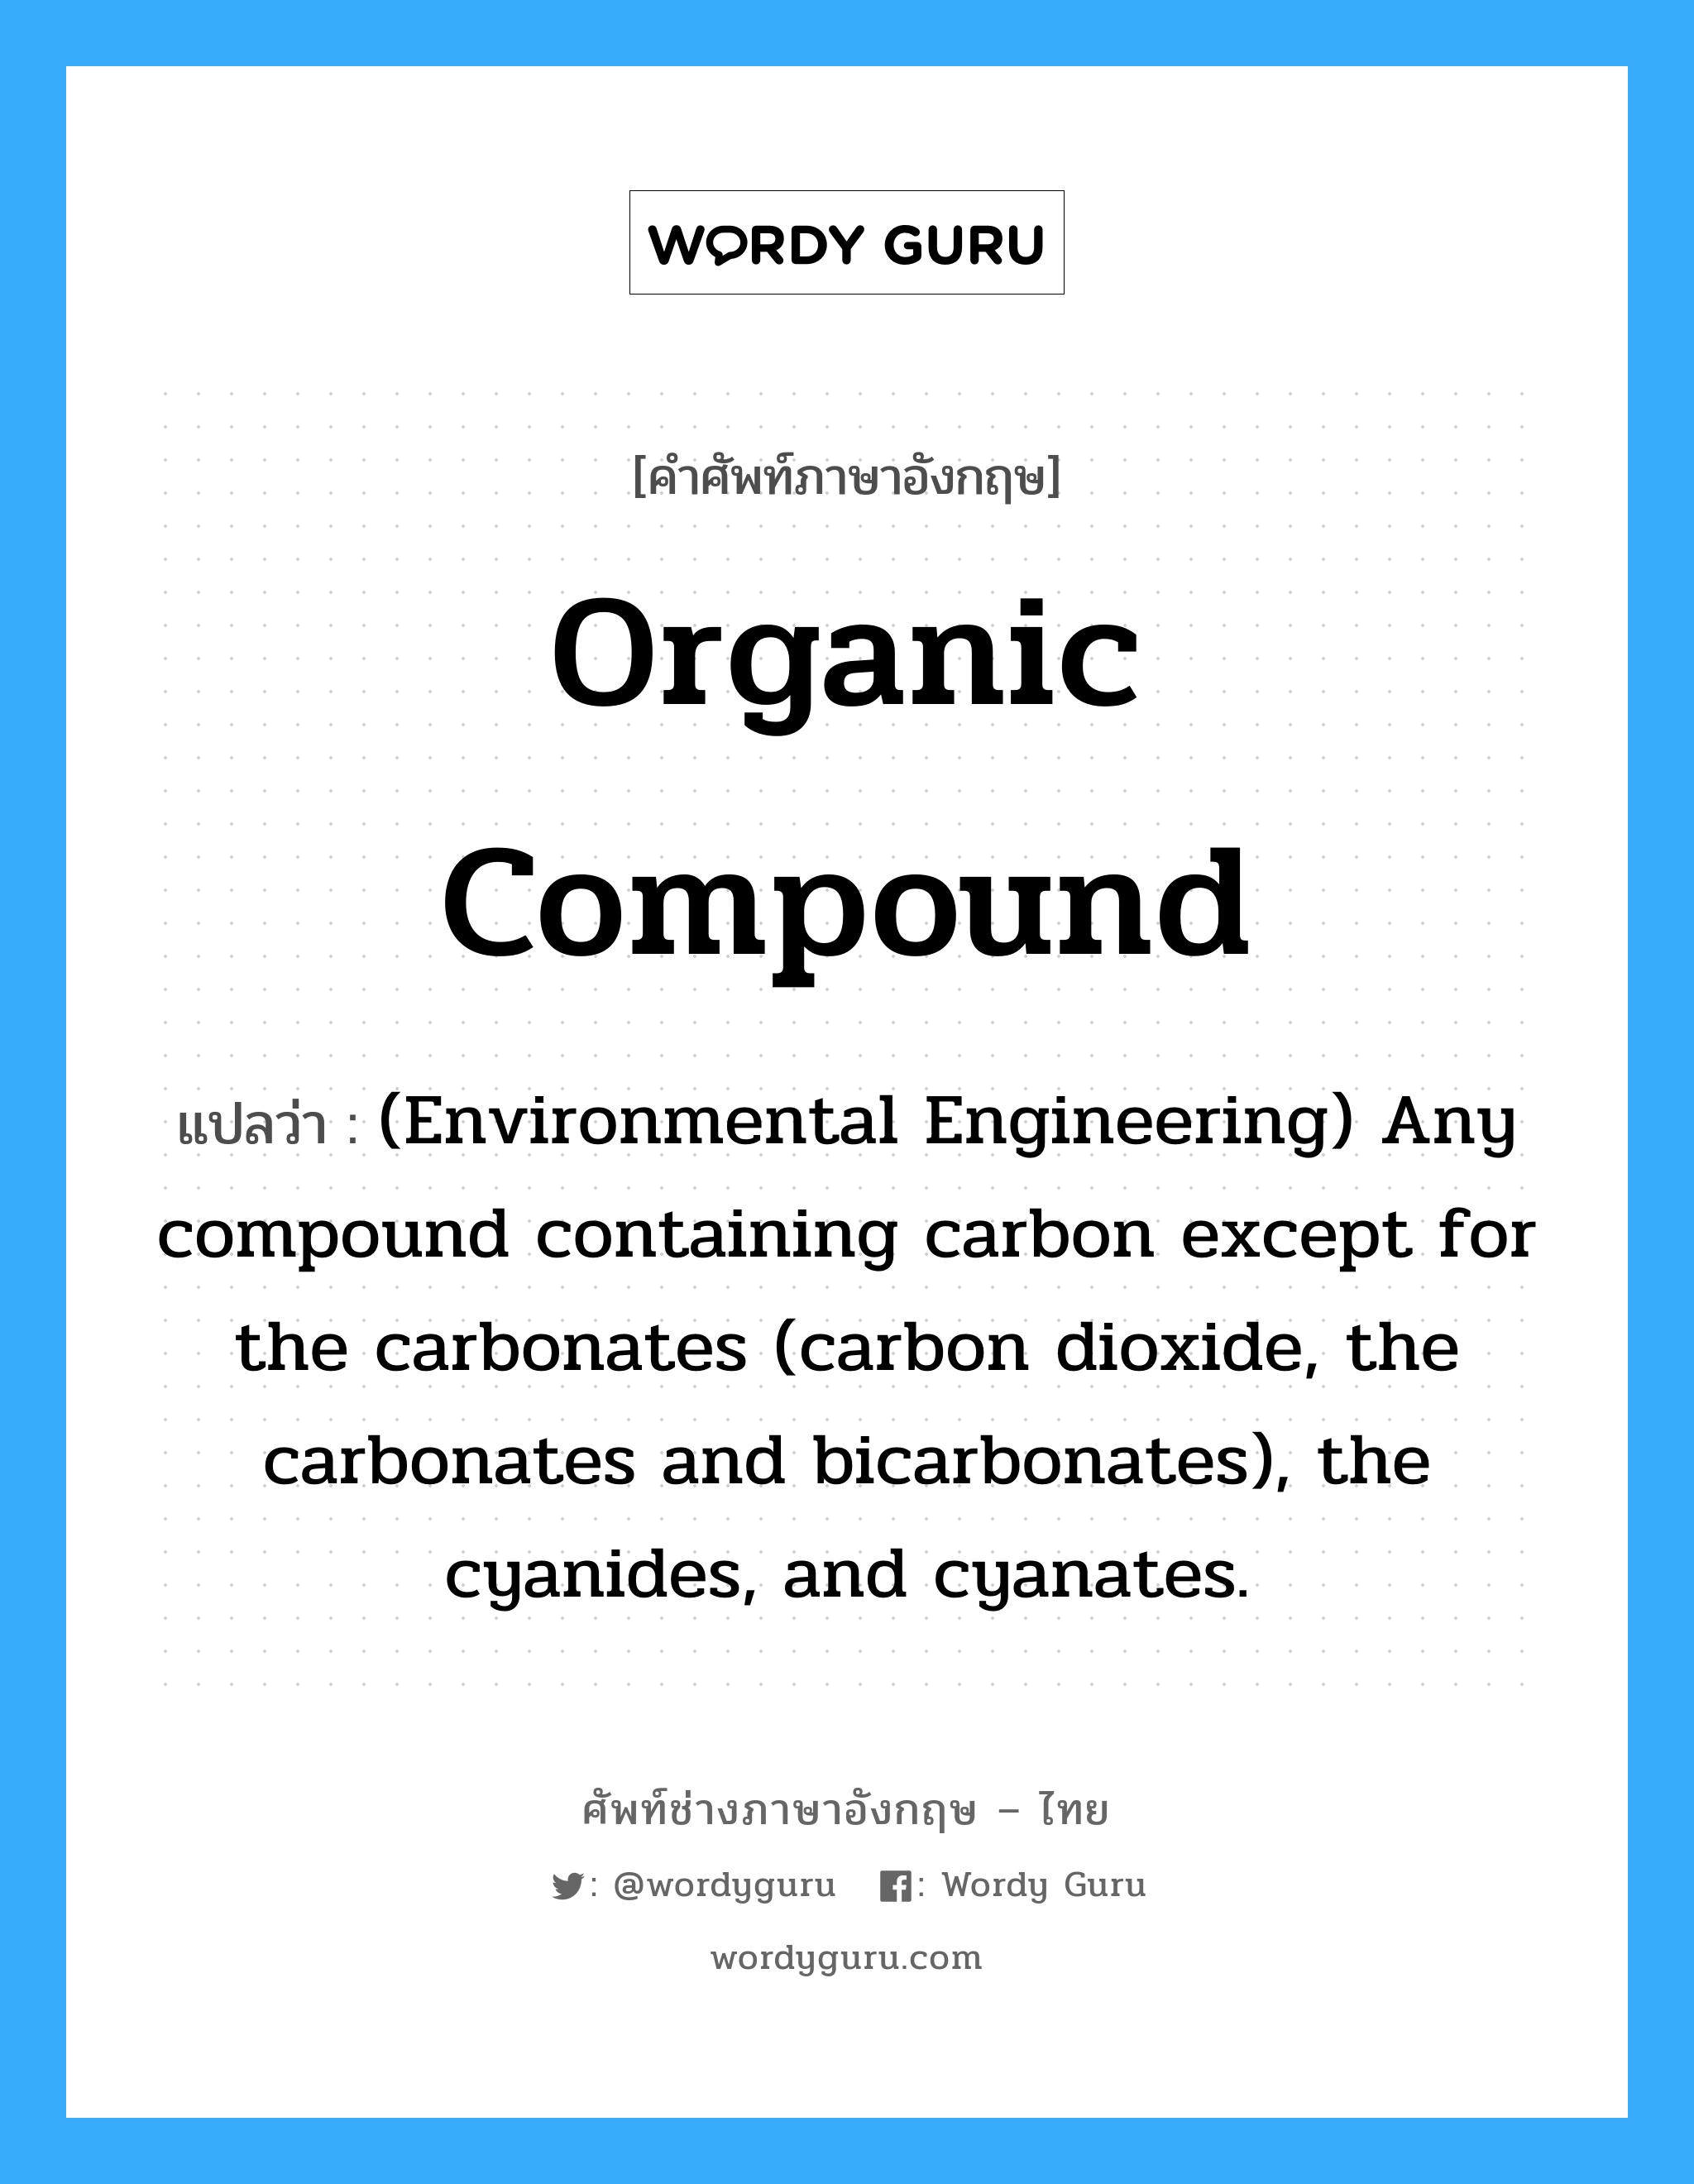 Organic compound แปลว่า?, คำศัพท์ช่างภาษาอังกฤษ - ไทย Organic compound คำศัพท์ภาษาอังกฤษ Organic compound แปลว่า (Environmental Engineering) Any compound containing carbon except for the carbonates (carbon dioxide, the carbonates and bicarbonates), the cyanides, and cyanates.